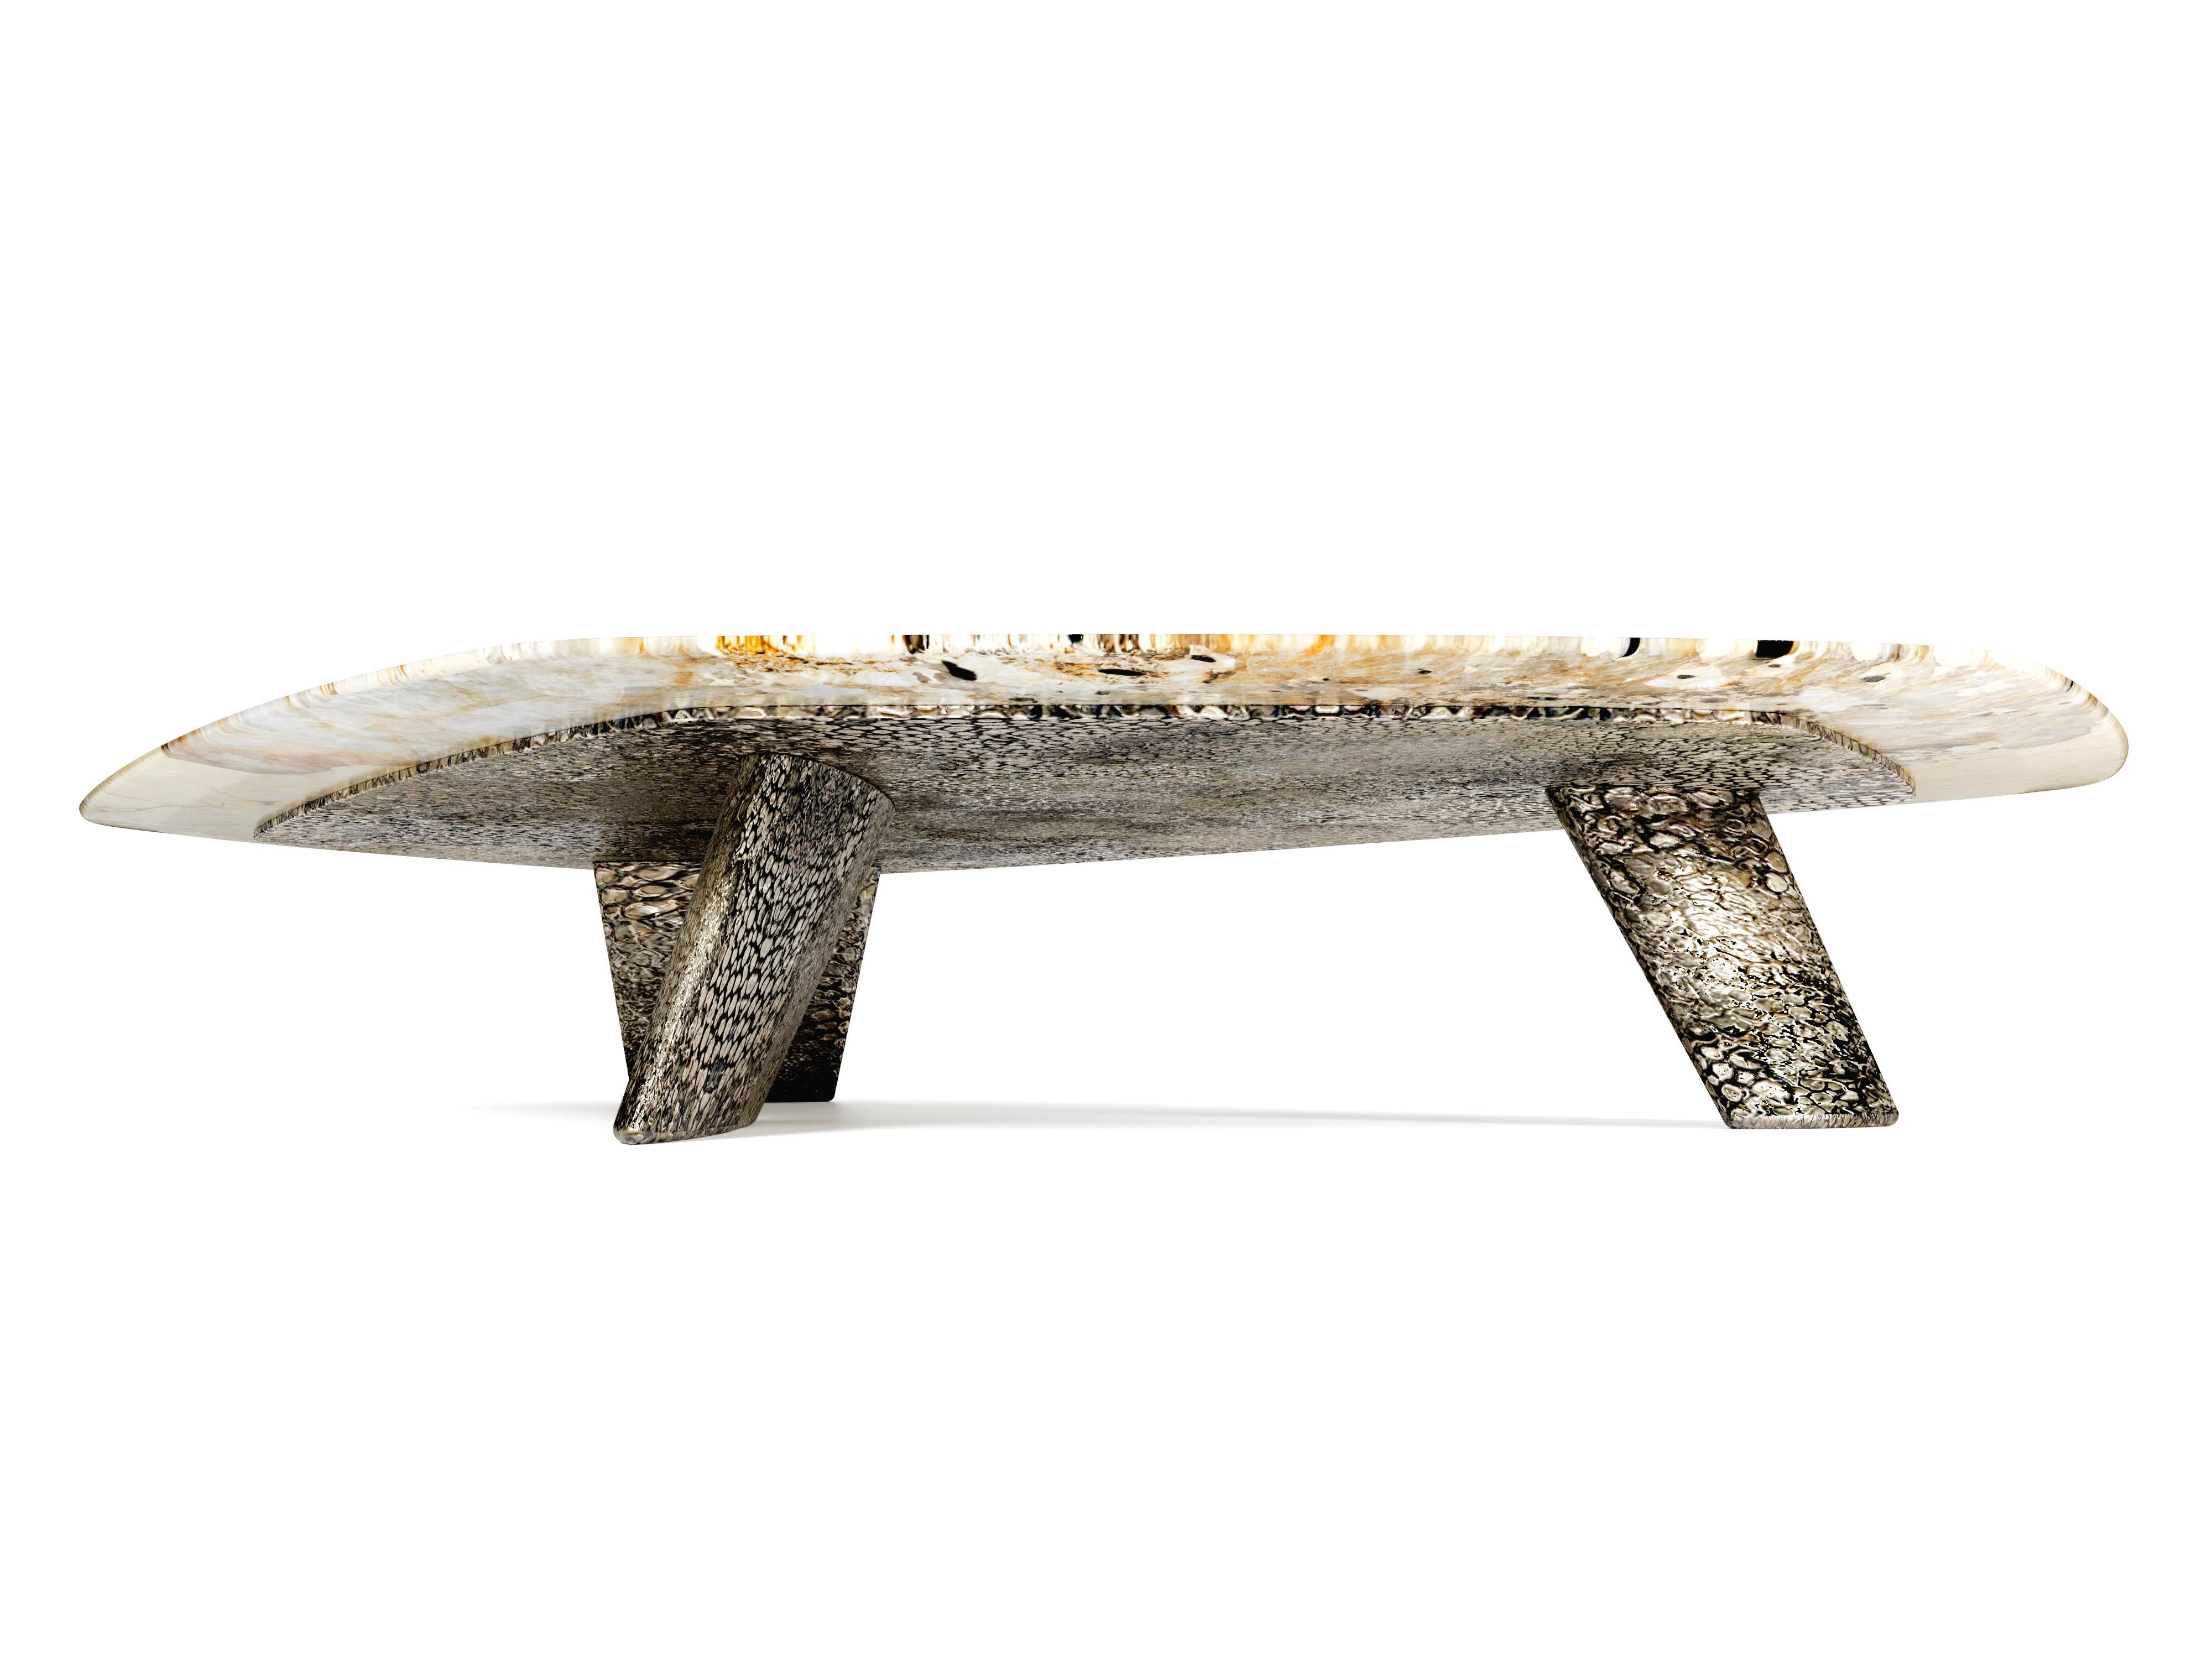 The elements III coffee table by Grzegorz Majka
Edition 1 of 1
Dimensions: D 121 x W 150 x H 33 cm
Materials: Marble, solid stainless steel plate in brushed finish

The Elements III is one of a kind and one of the series of various coffee